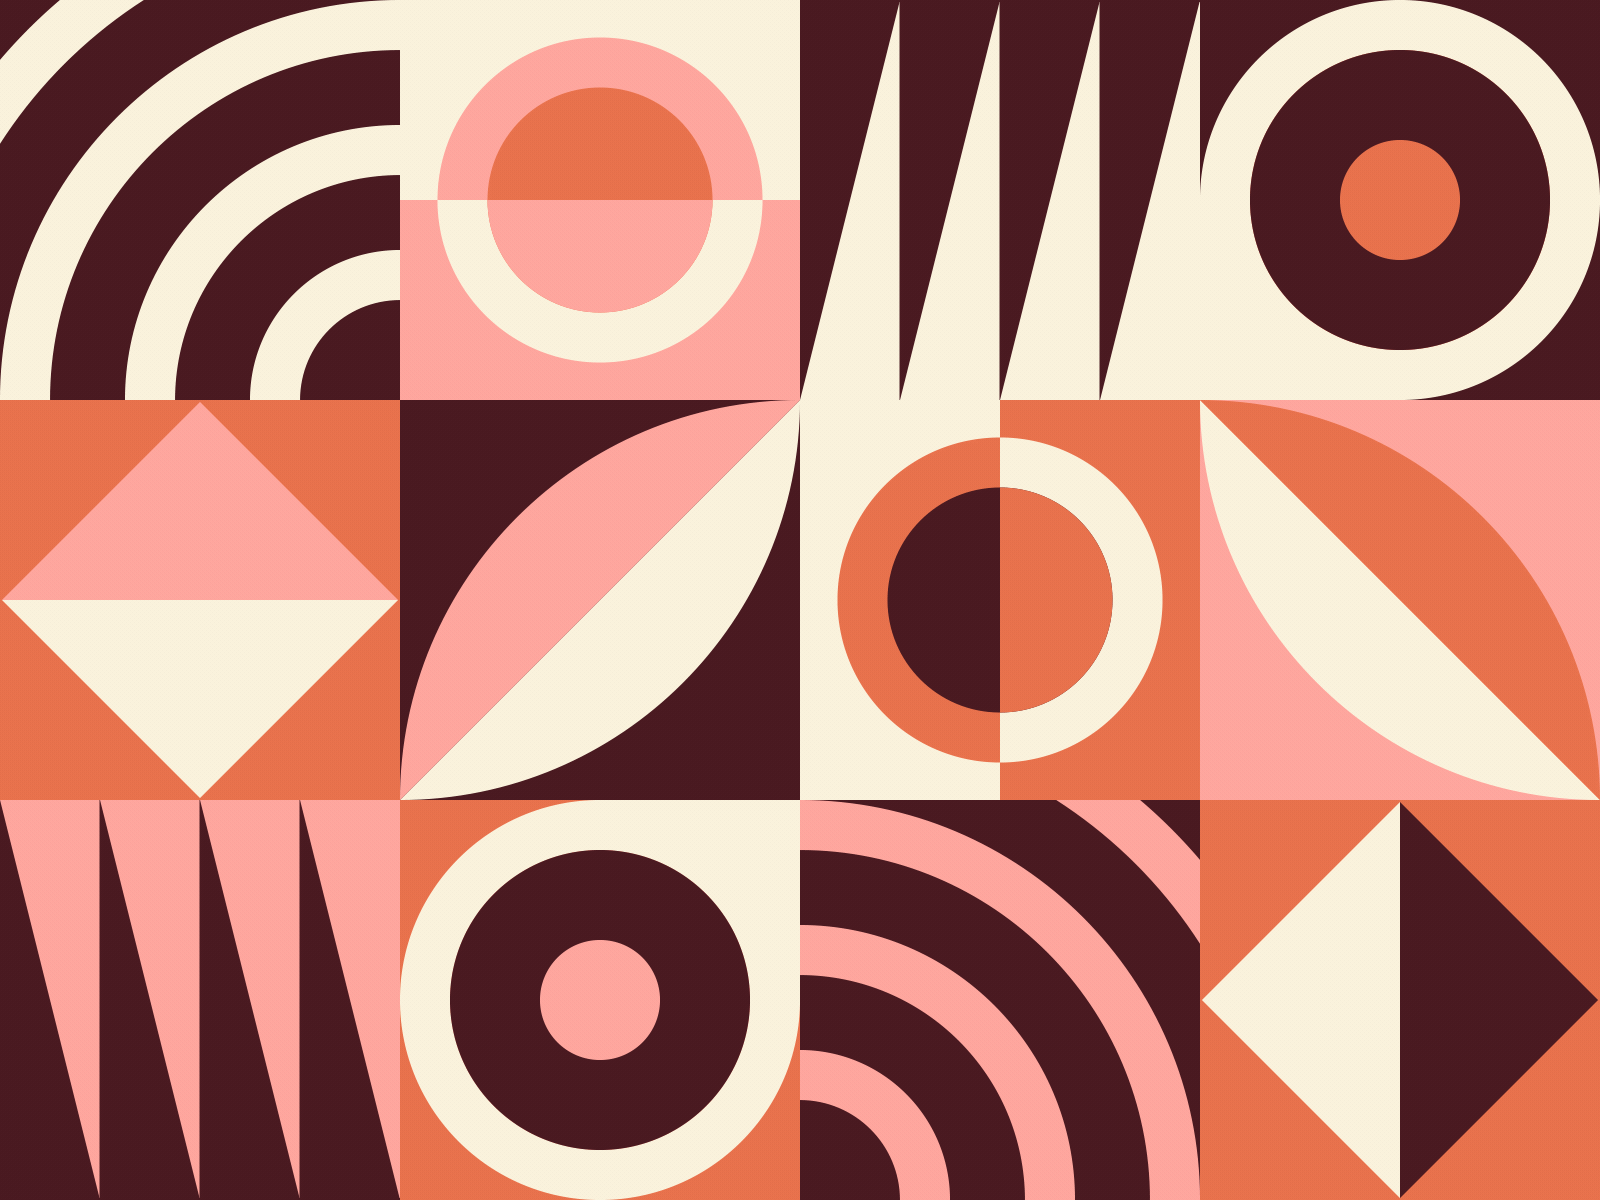 Retro shapes and colors